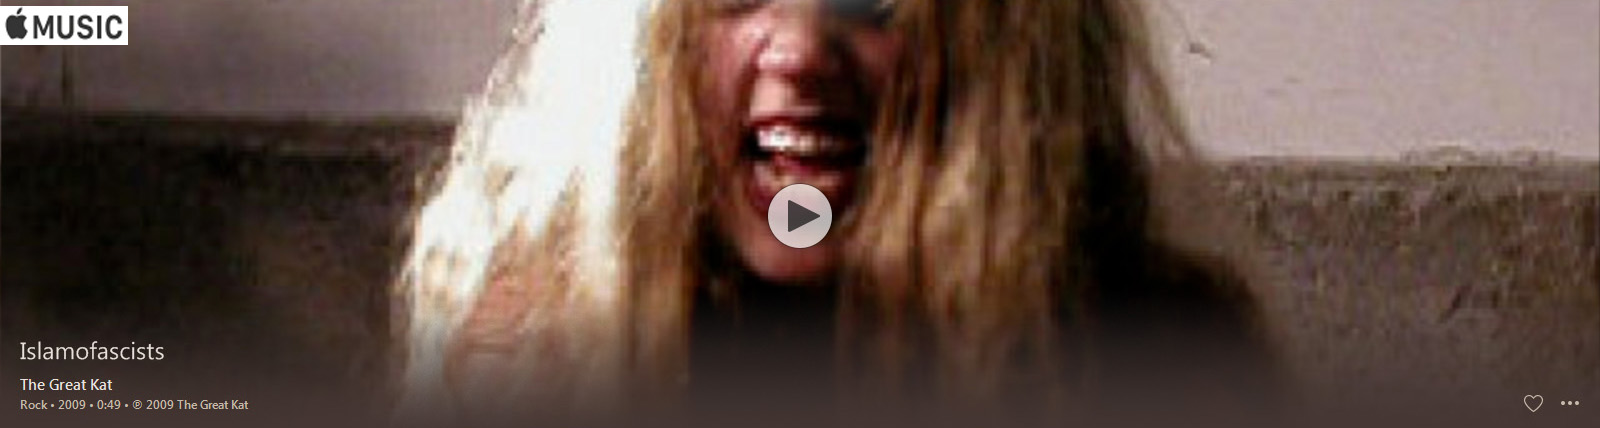 APPLE MUSIC is NOW STREAMING The Great Kat's "ISLAMOFASCISTS" MUSIC VIDEO